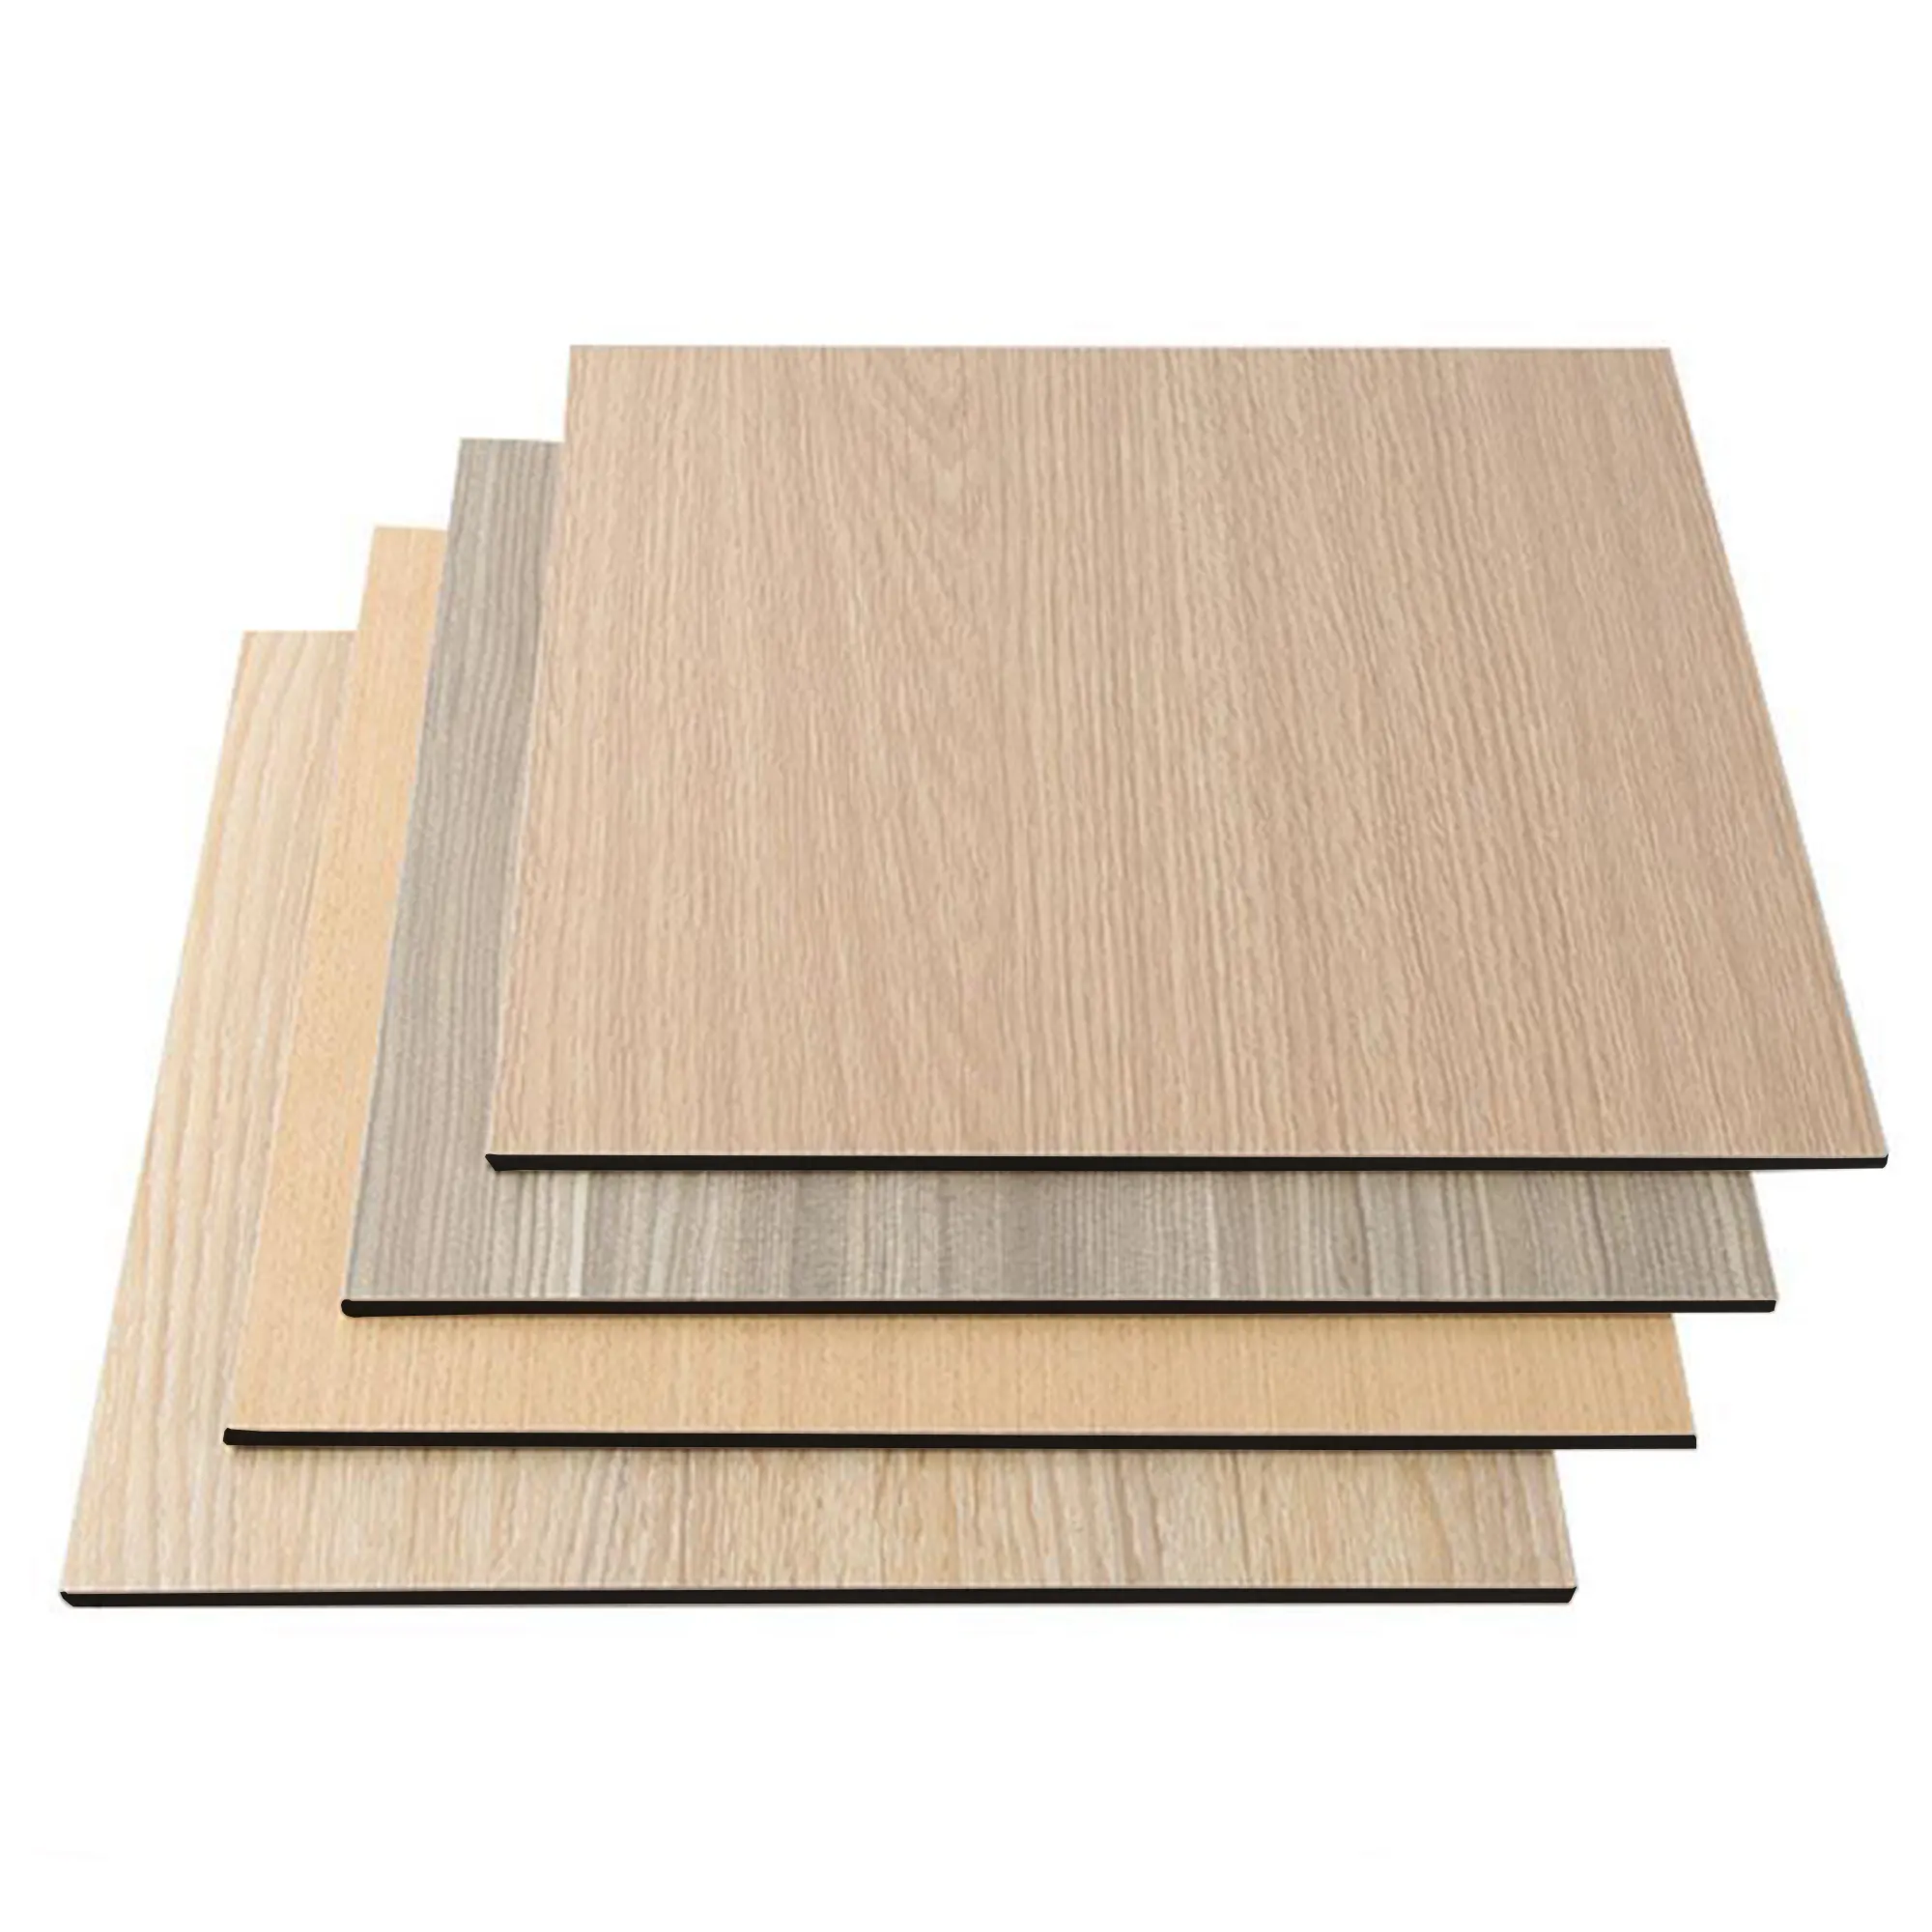 Perfect Quality 0.5mm - 25mm corrosion resistant solid color / wood grain hpl laminate sheet waterproof wall hpl clad